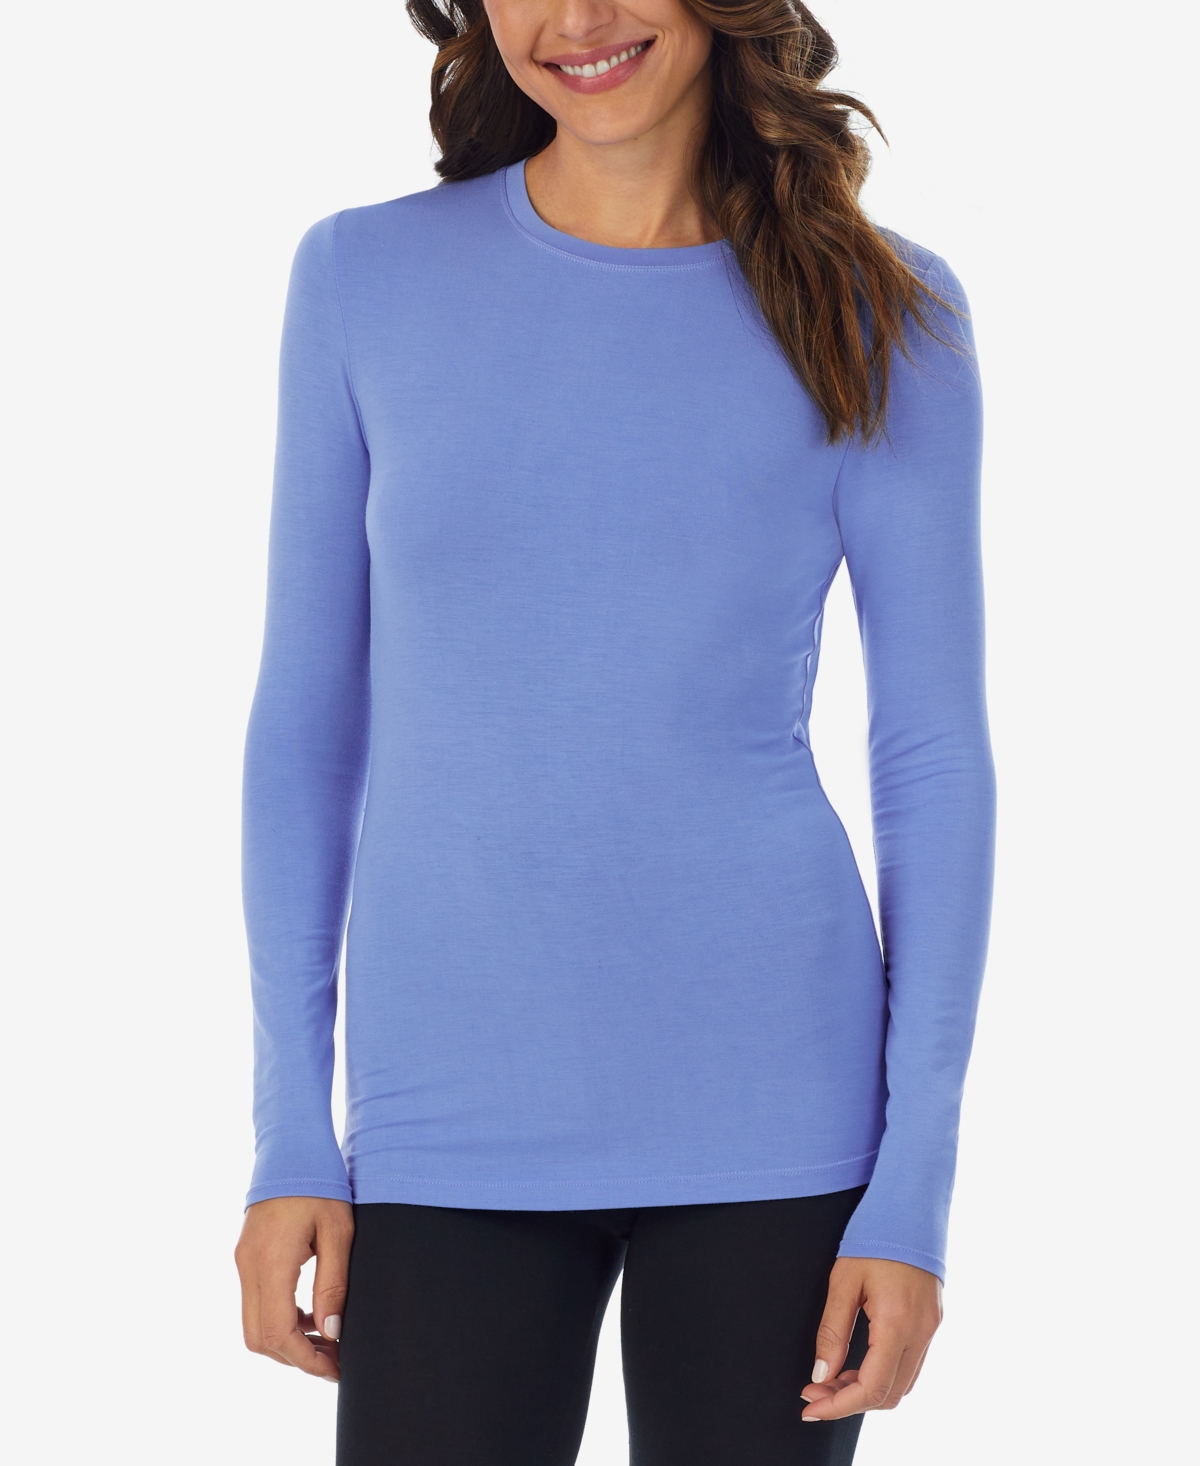 Cuddl Duds Softwear With Stretch Long-sleeve Layering Top In Ultramarine